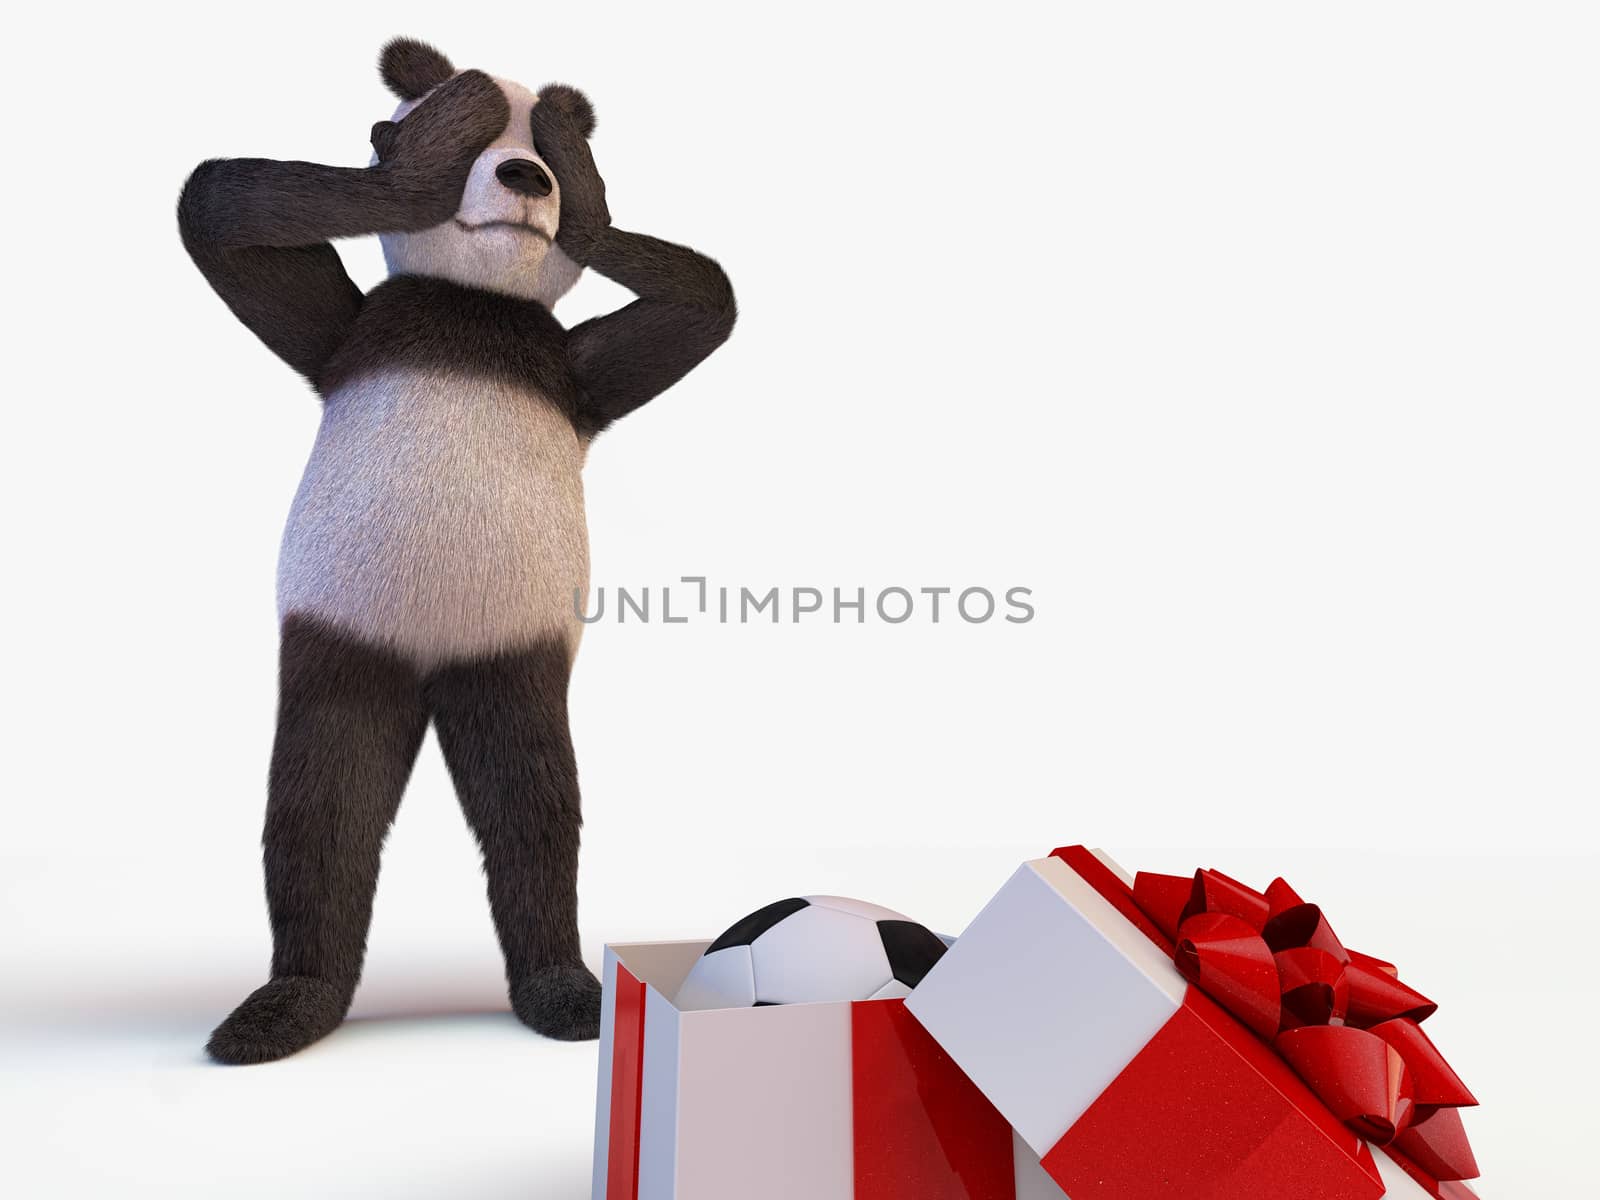 joyful cute protagonist character giant panda bamboo stands behind semi-open box with a gift inside of which is new soccer ball. surprise birthday man closes his eyes paws by xtate